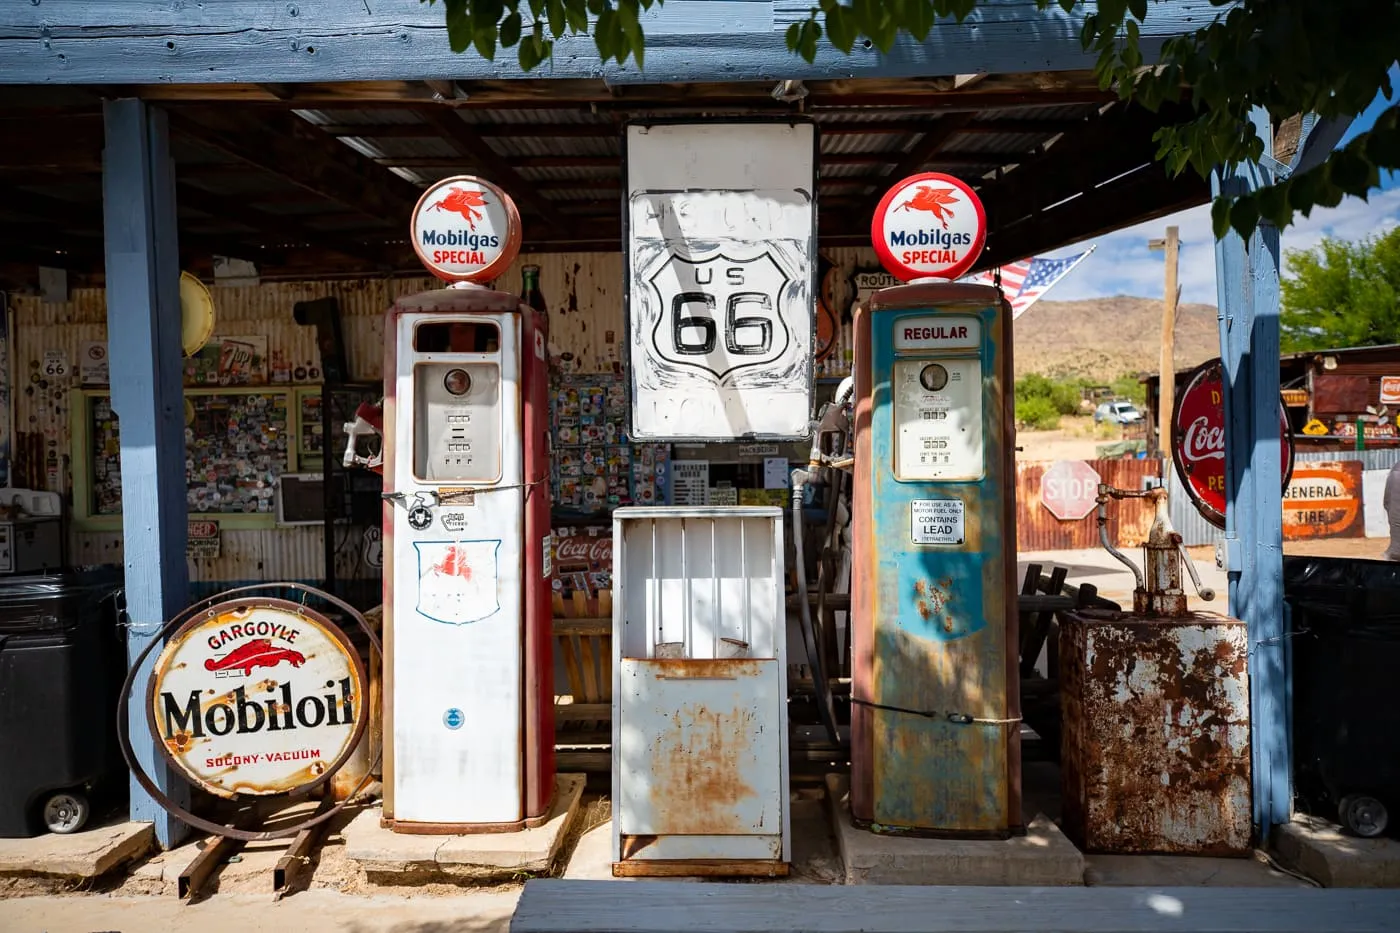 Vintage Gas pumps at Hackberry General Store in Kingman, Arizona Route 66 Roadside Attraction and Souvenir Shop